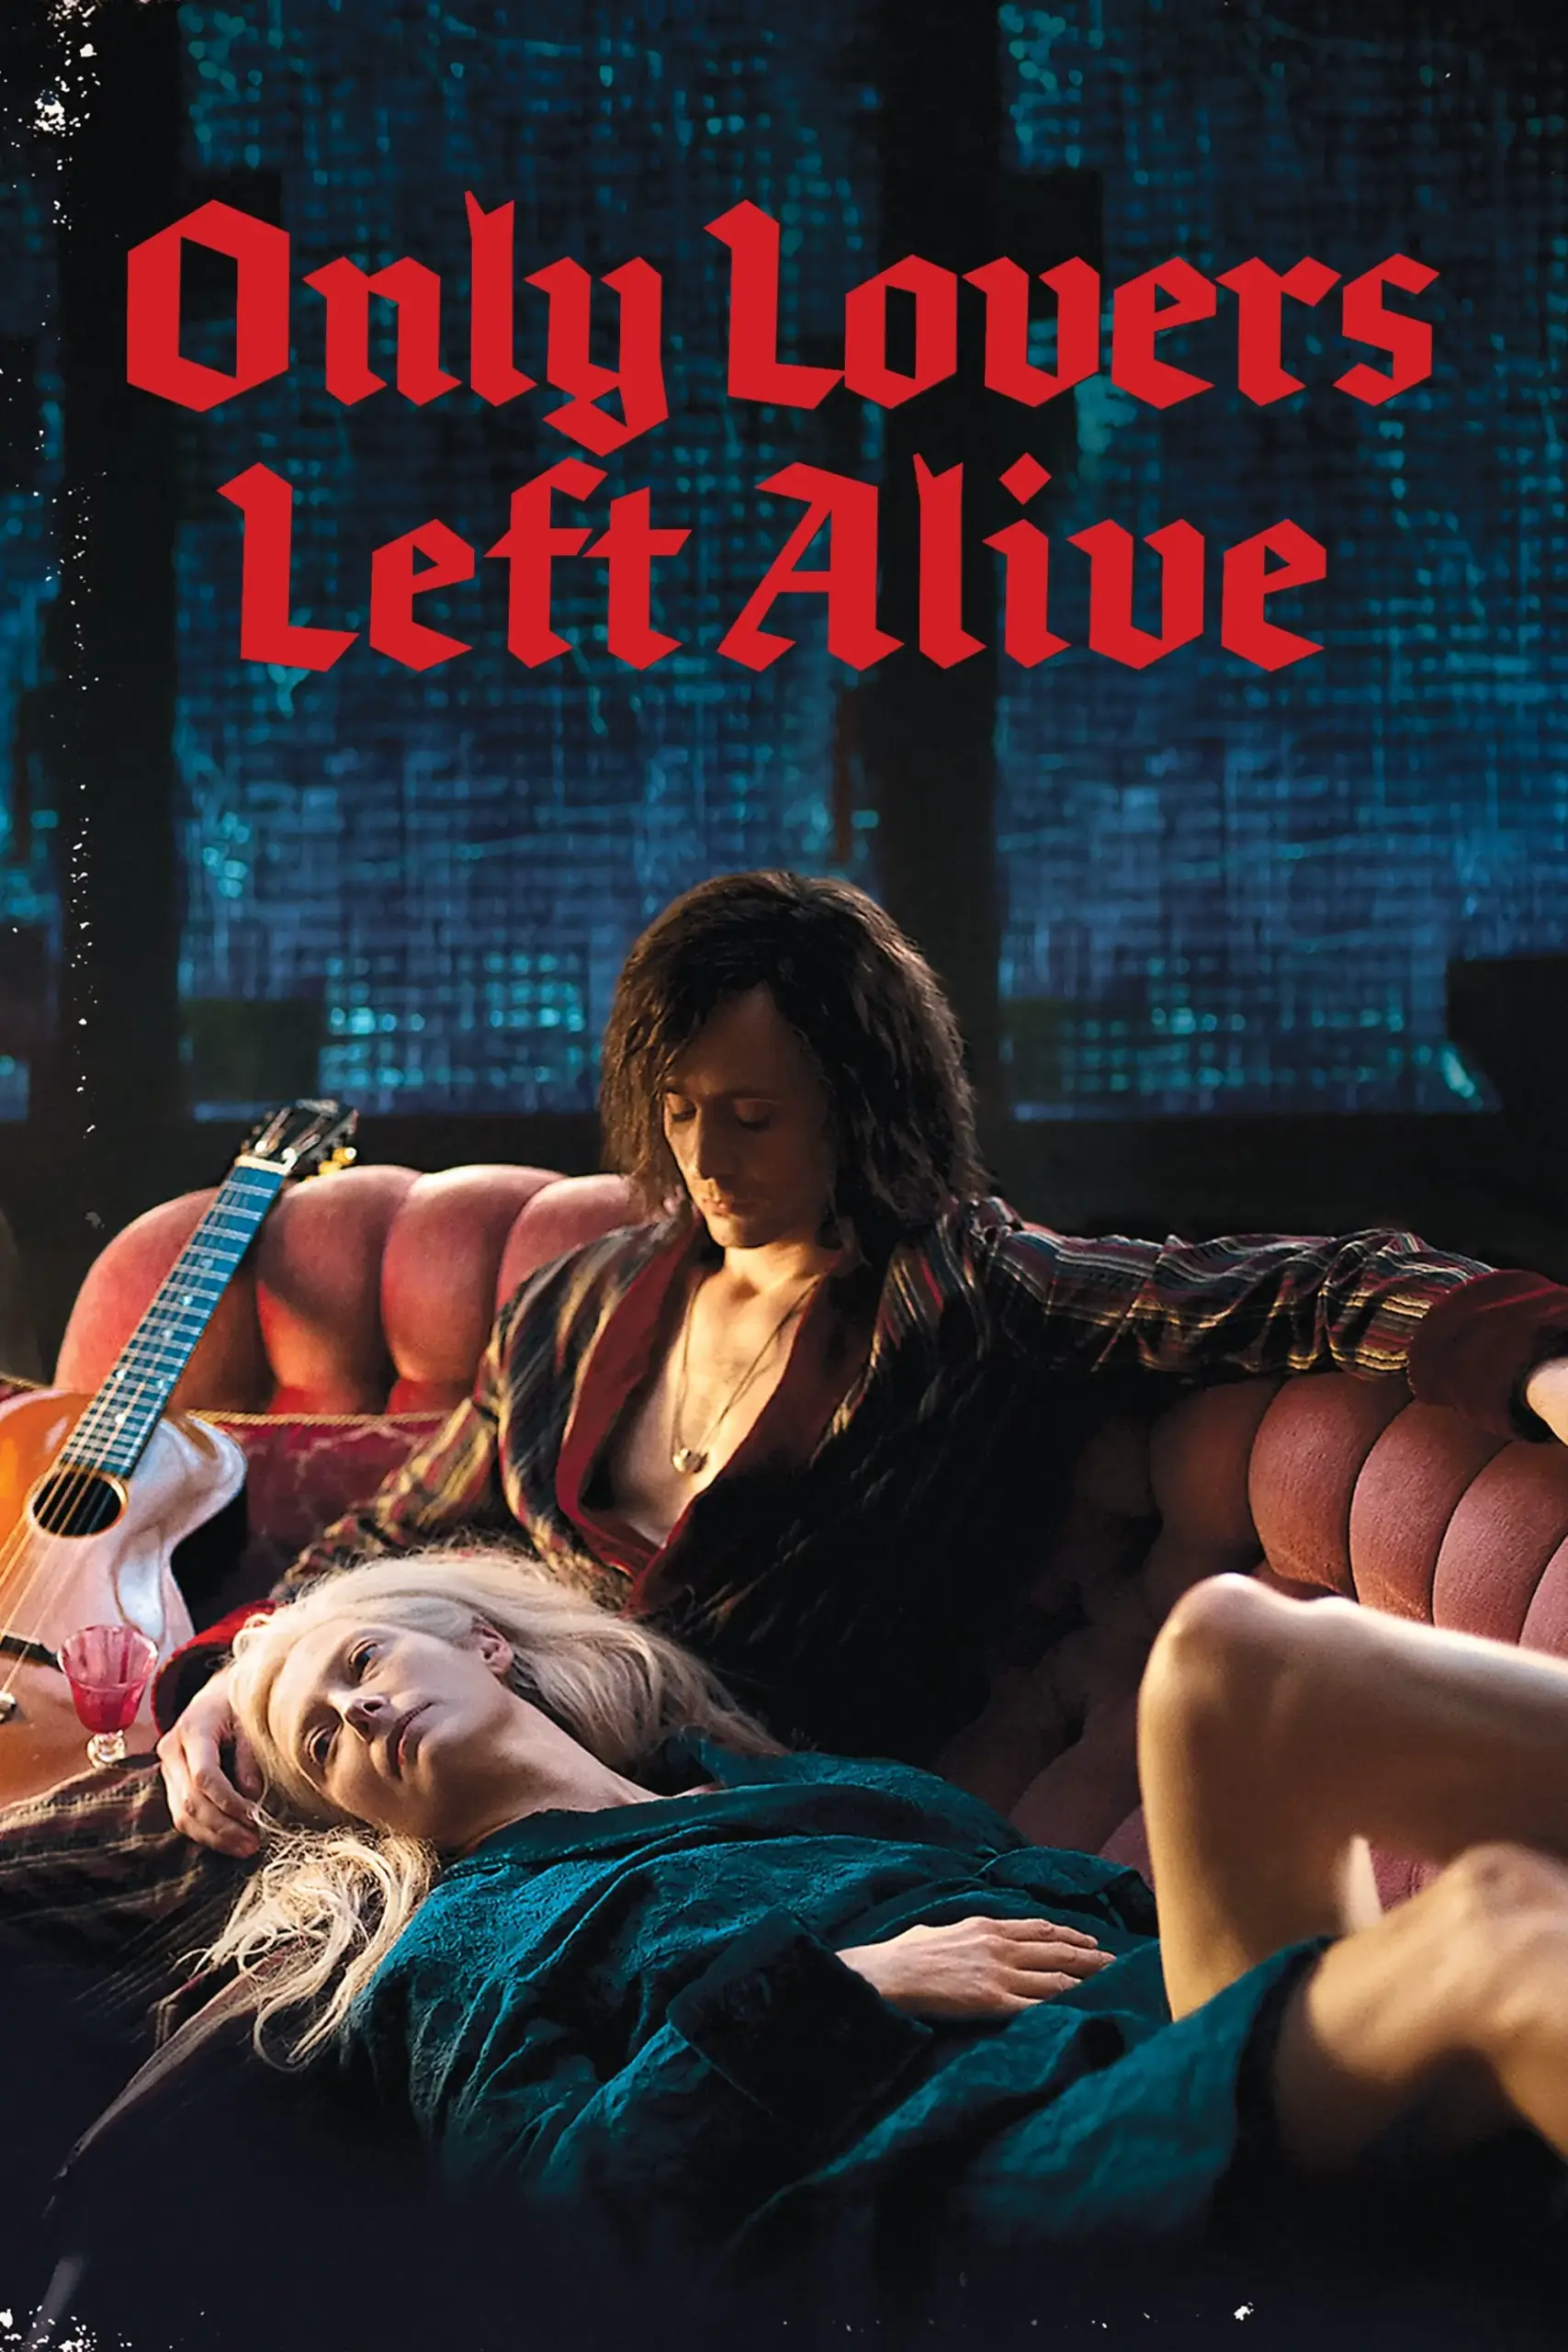 Filmposter Only Lovers Left Alive